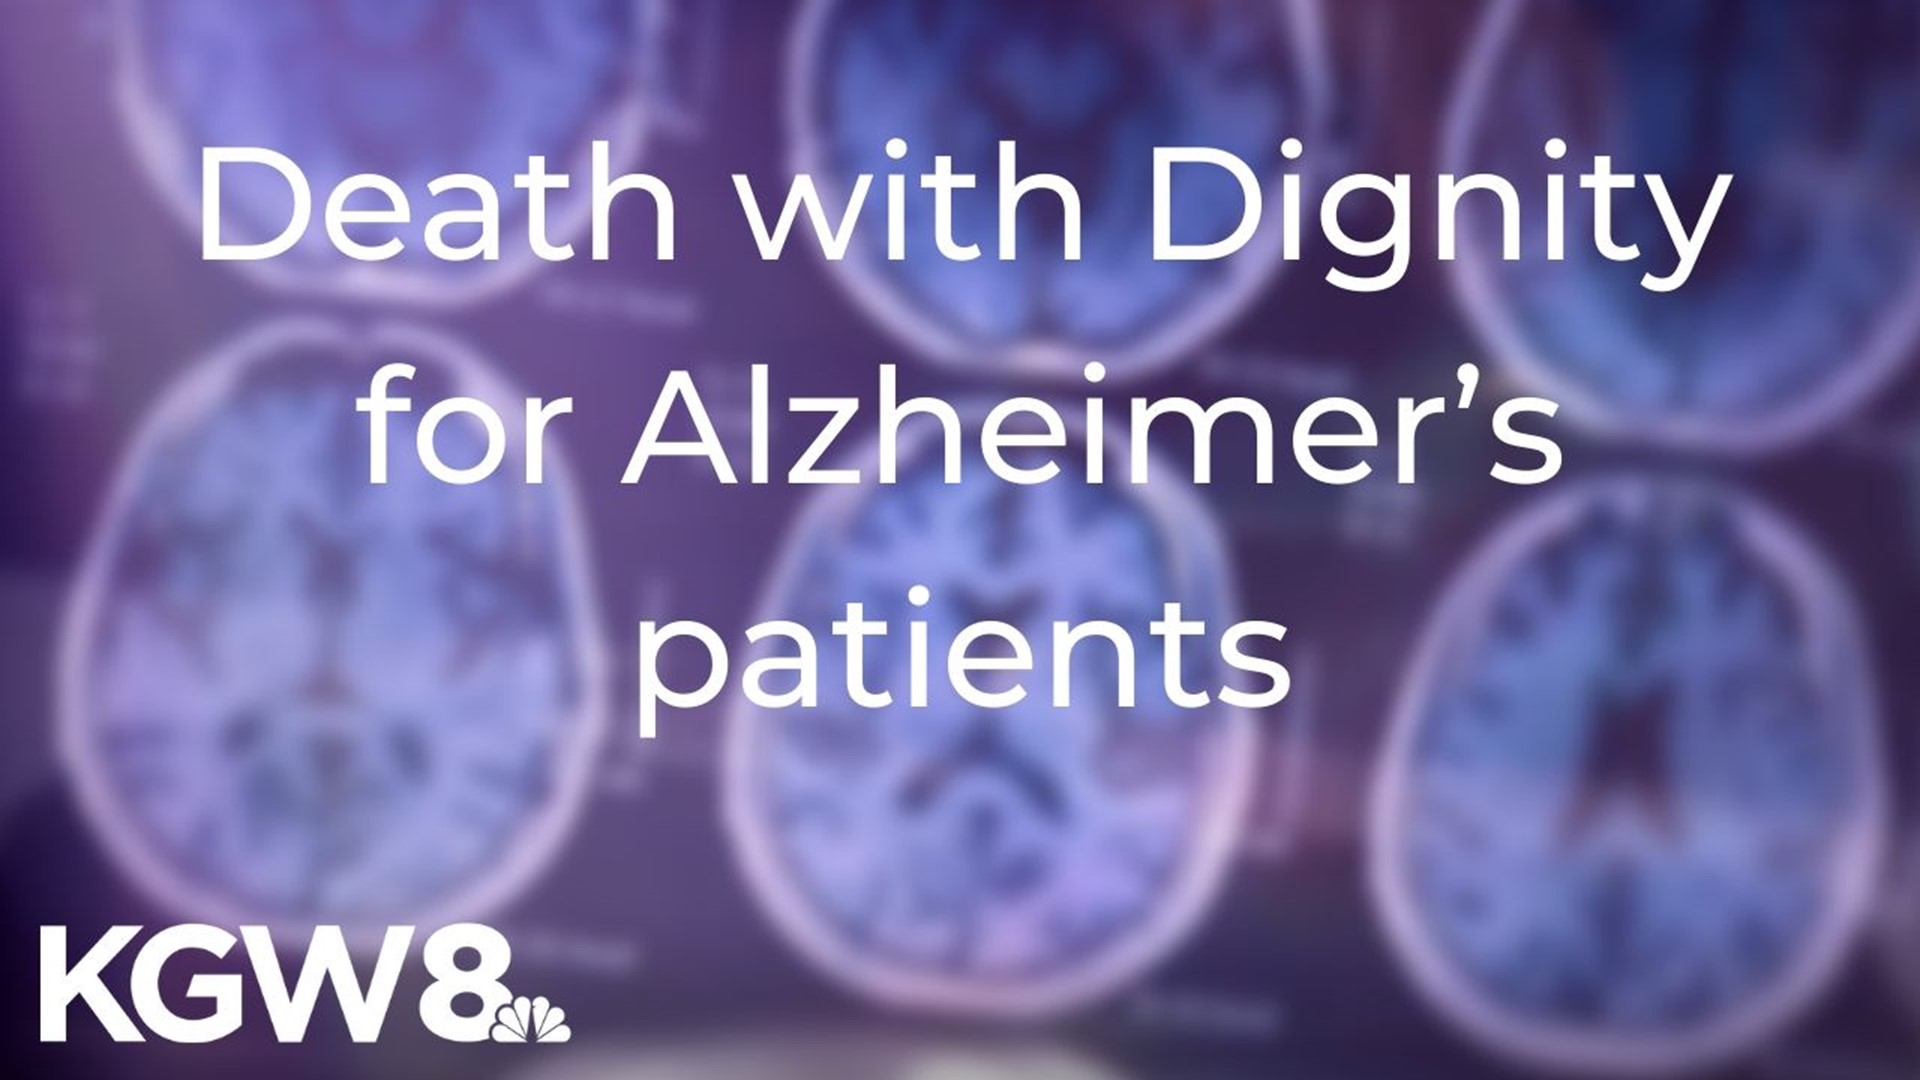 An Oregon woman with Alzheimer’s hoped to use the state’s Death with Dignity law but found that under the current legislation, she could not.